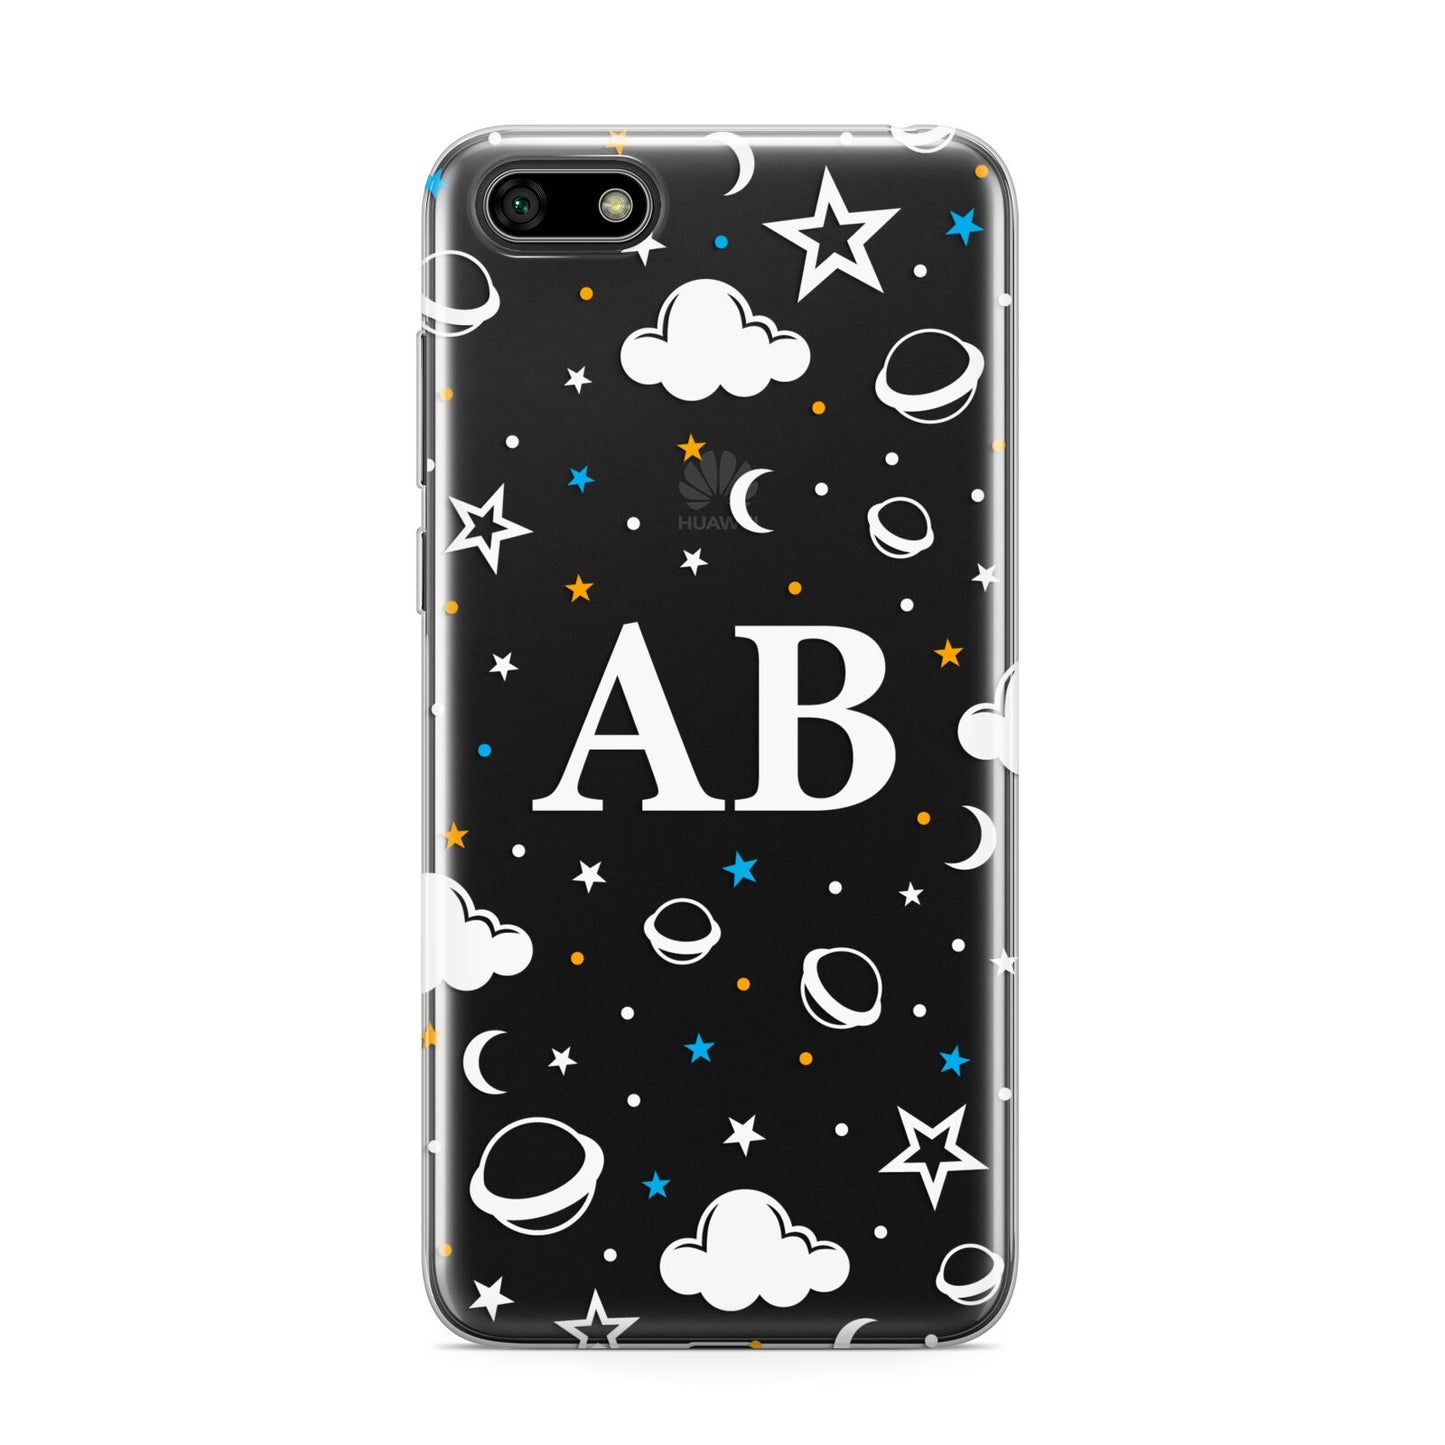 Astronomical Initials Huawei Y5 Prime 2018 Phone Case